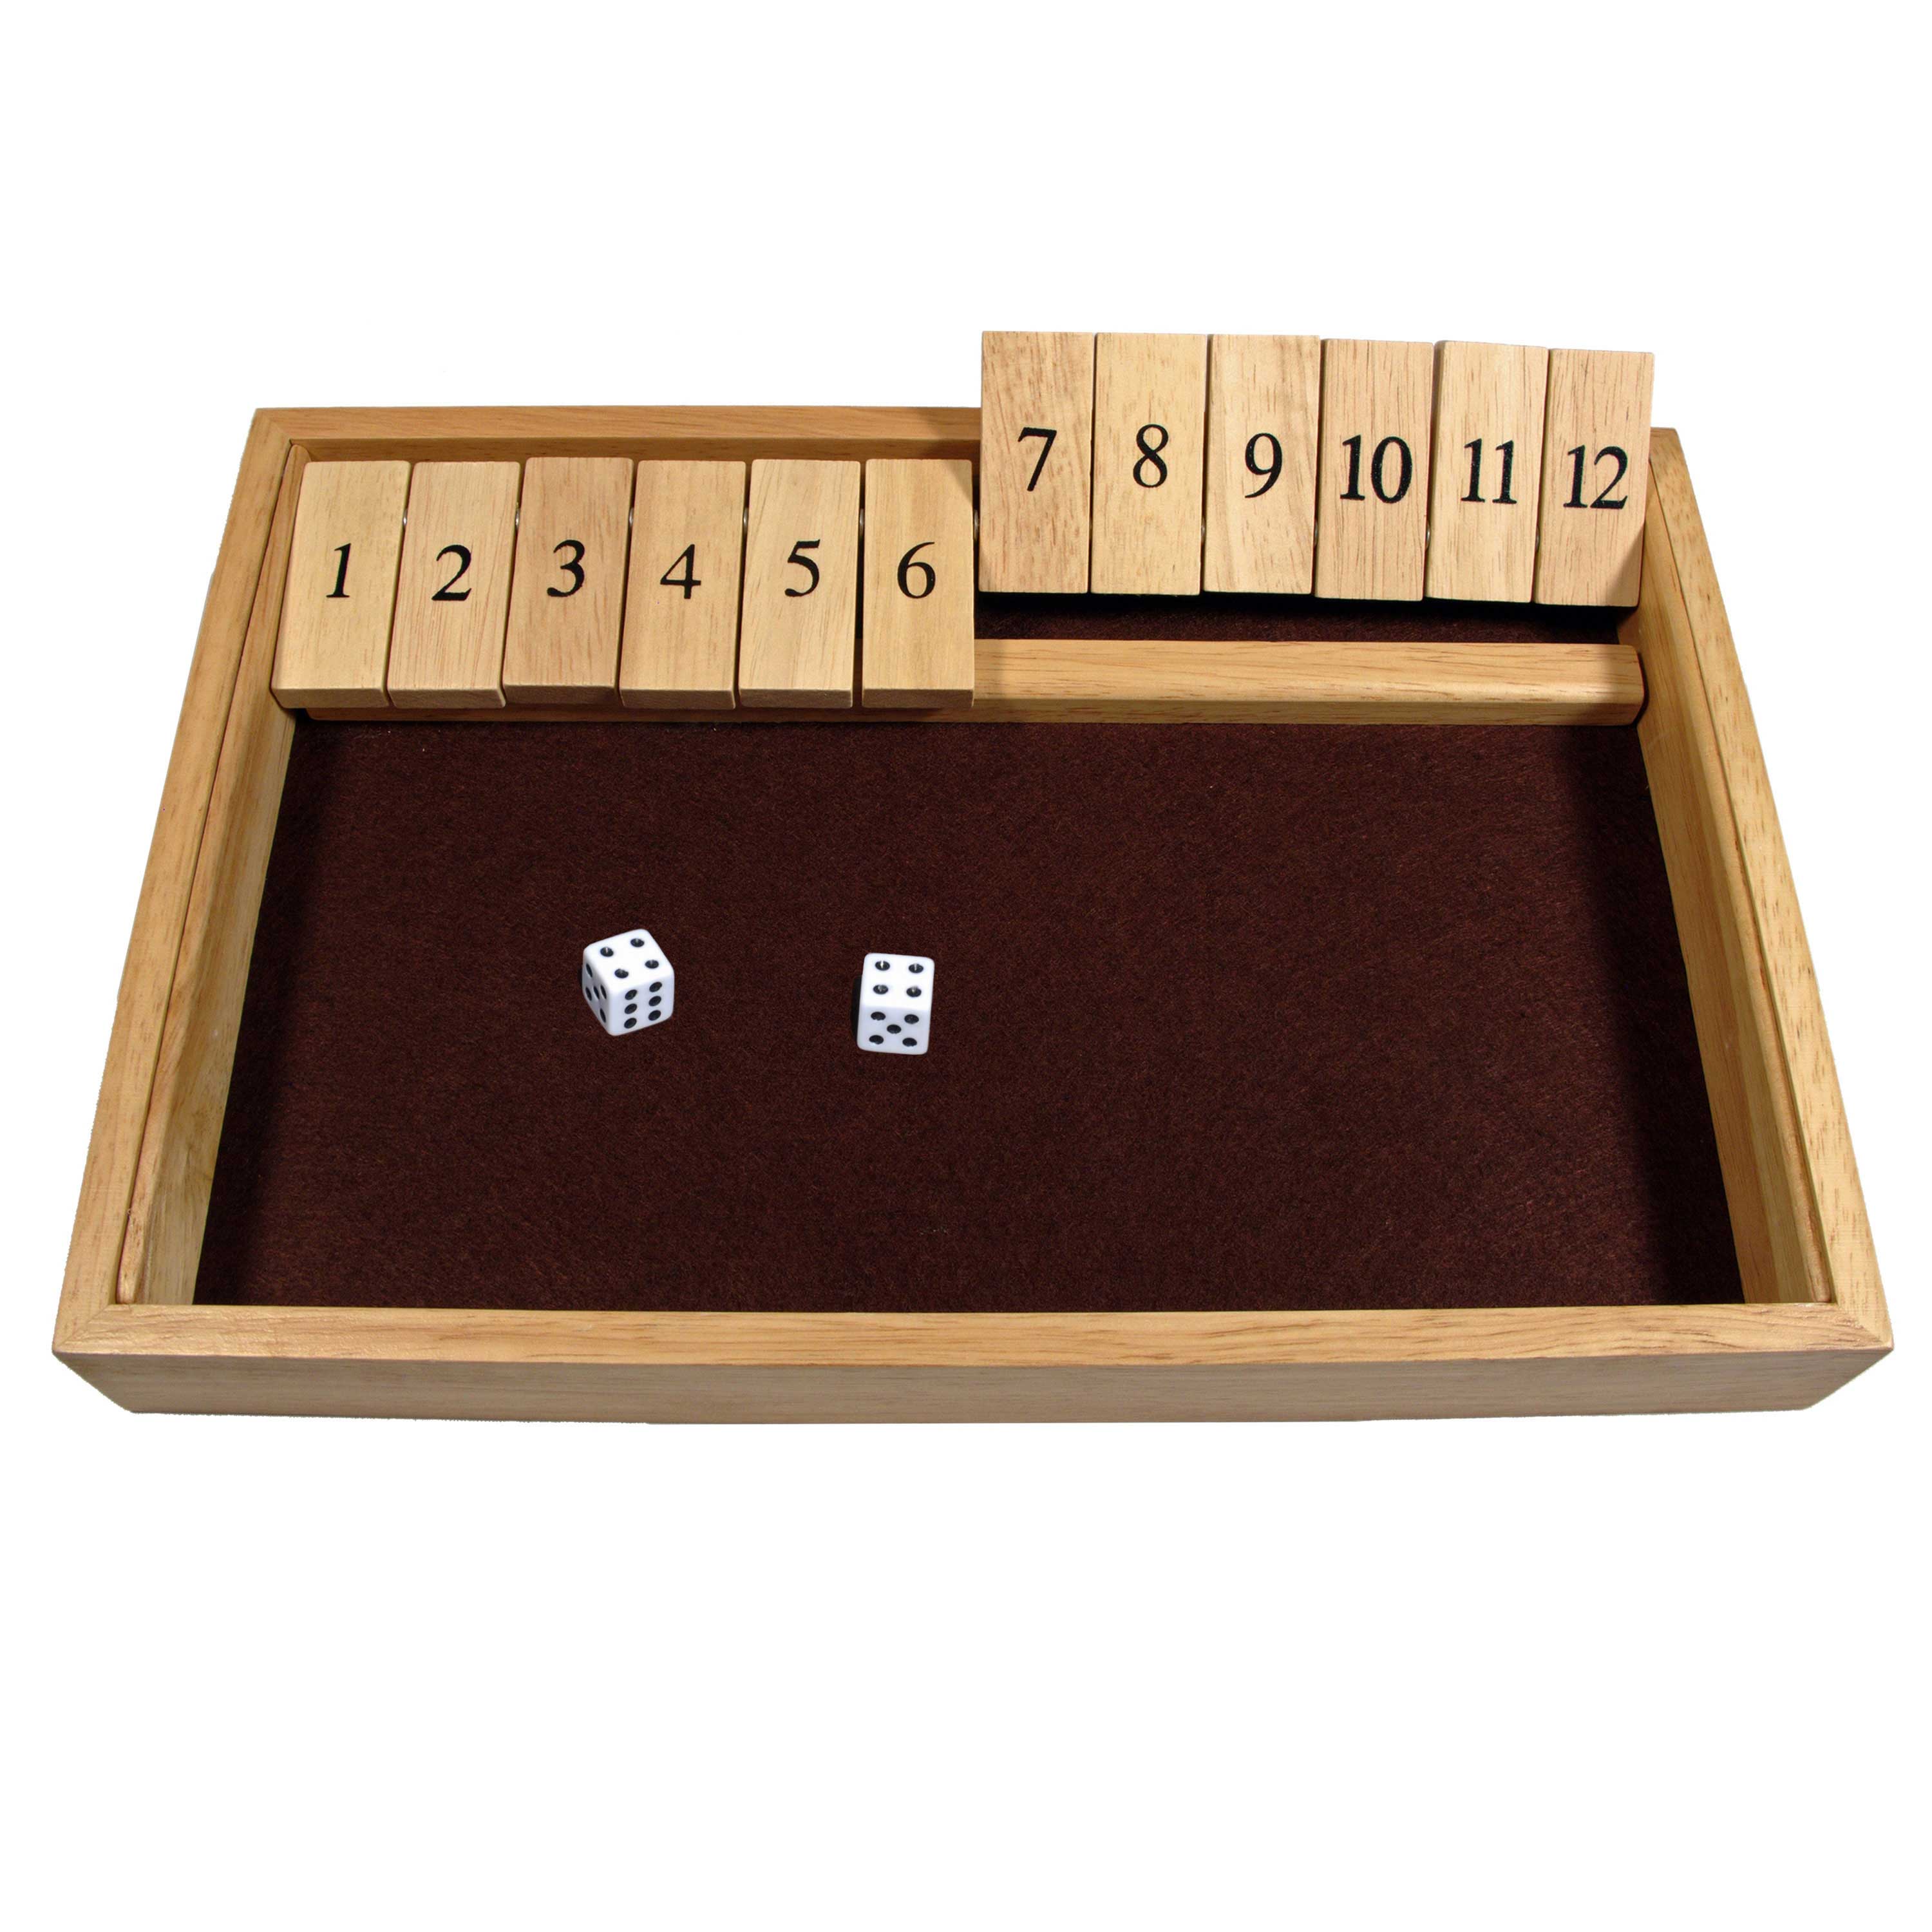 Wooden Board Game Shut the Box Dice Game Traditional Dice Game Math Game ONY 